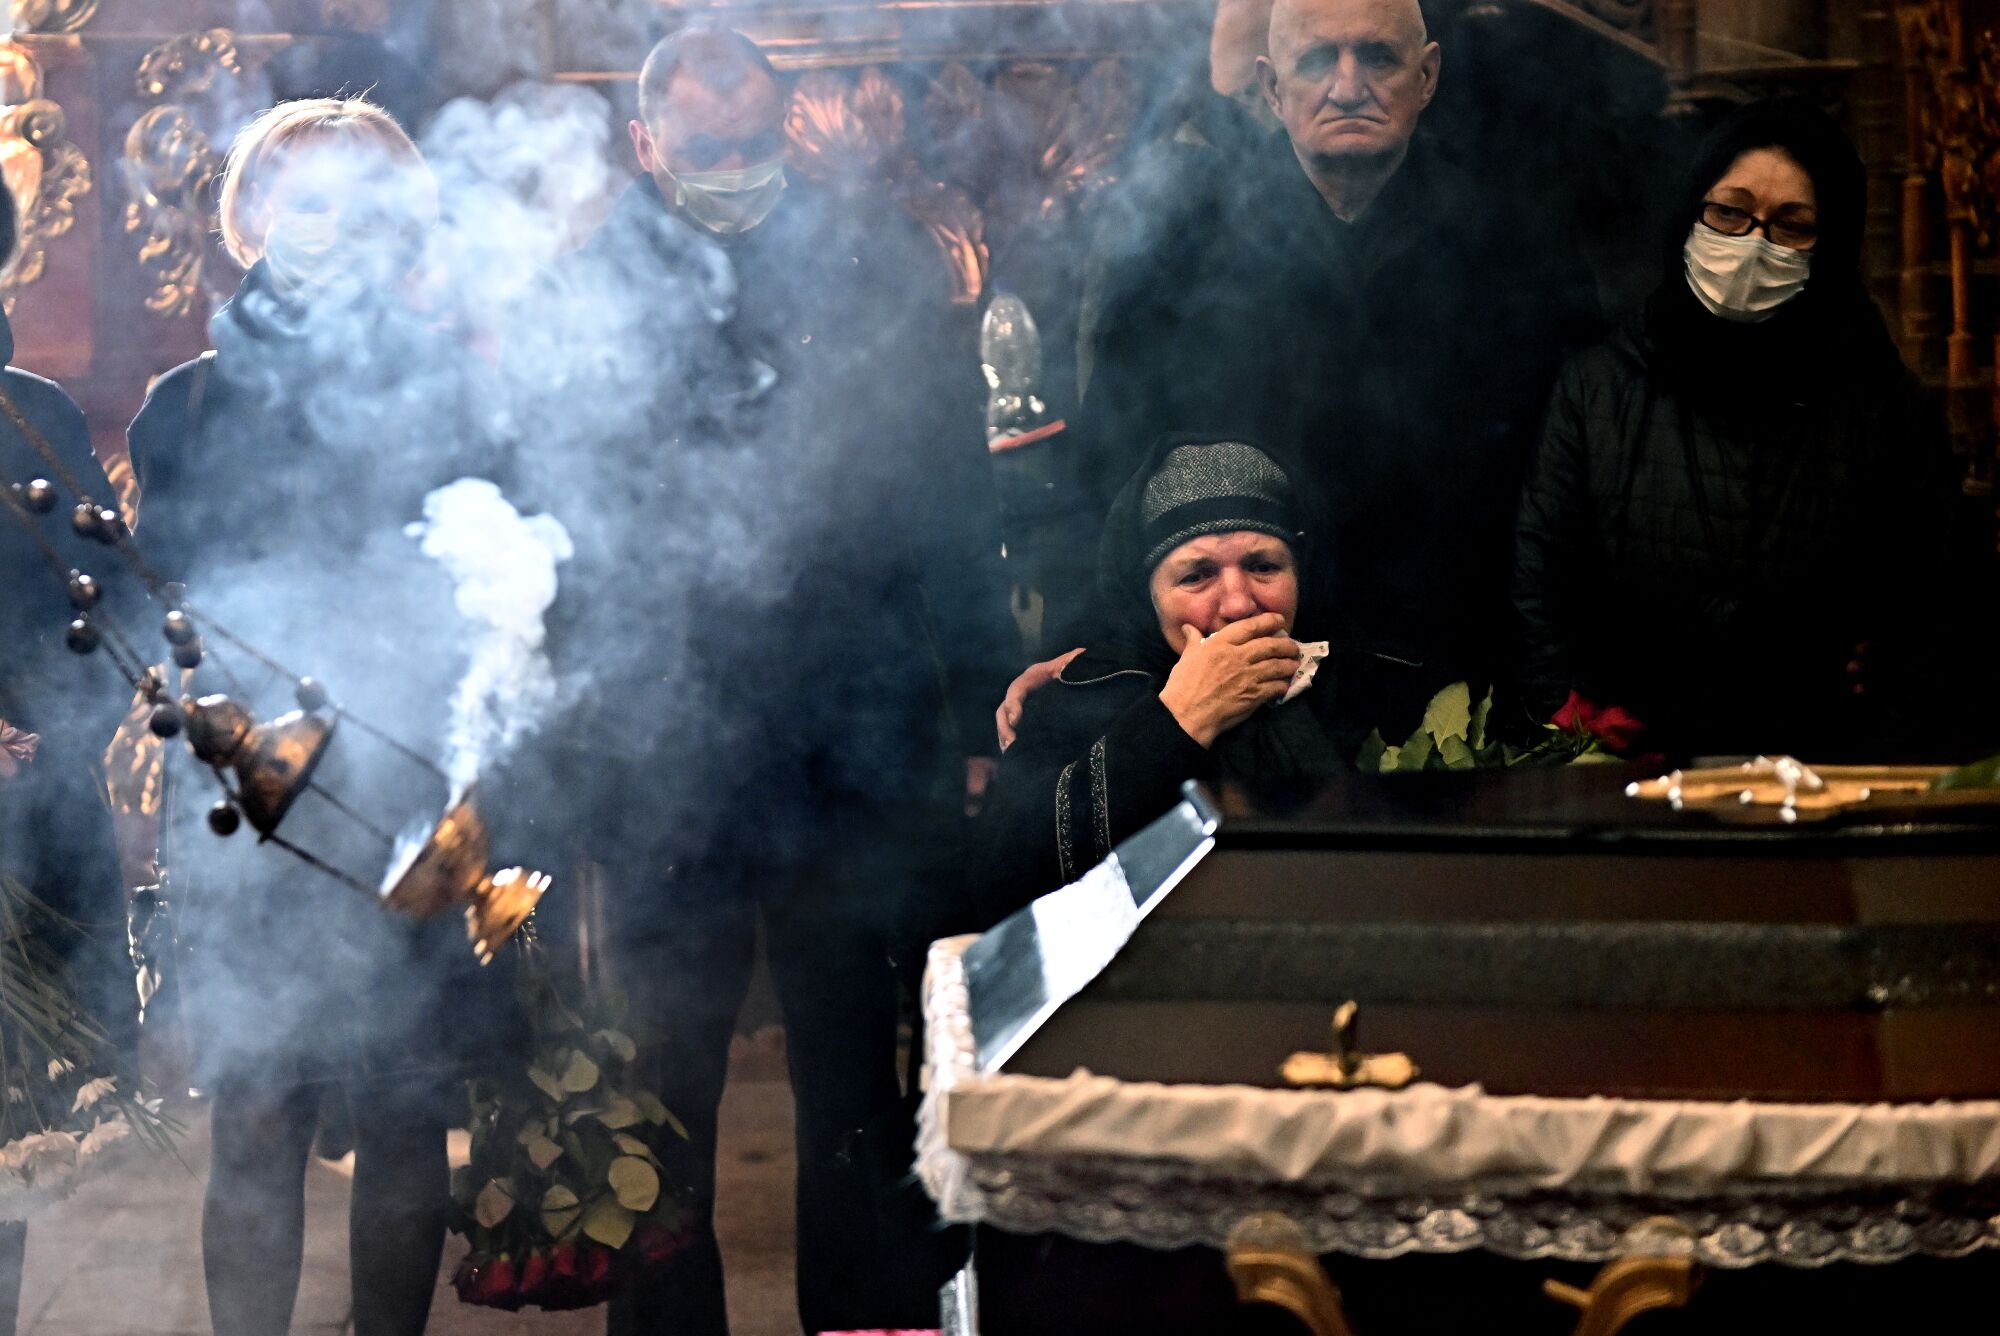 Family members mourn during a funeral service for Ukrainian soldier Ivan Skrypnyk.